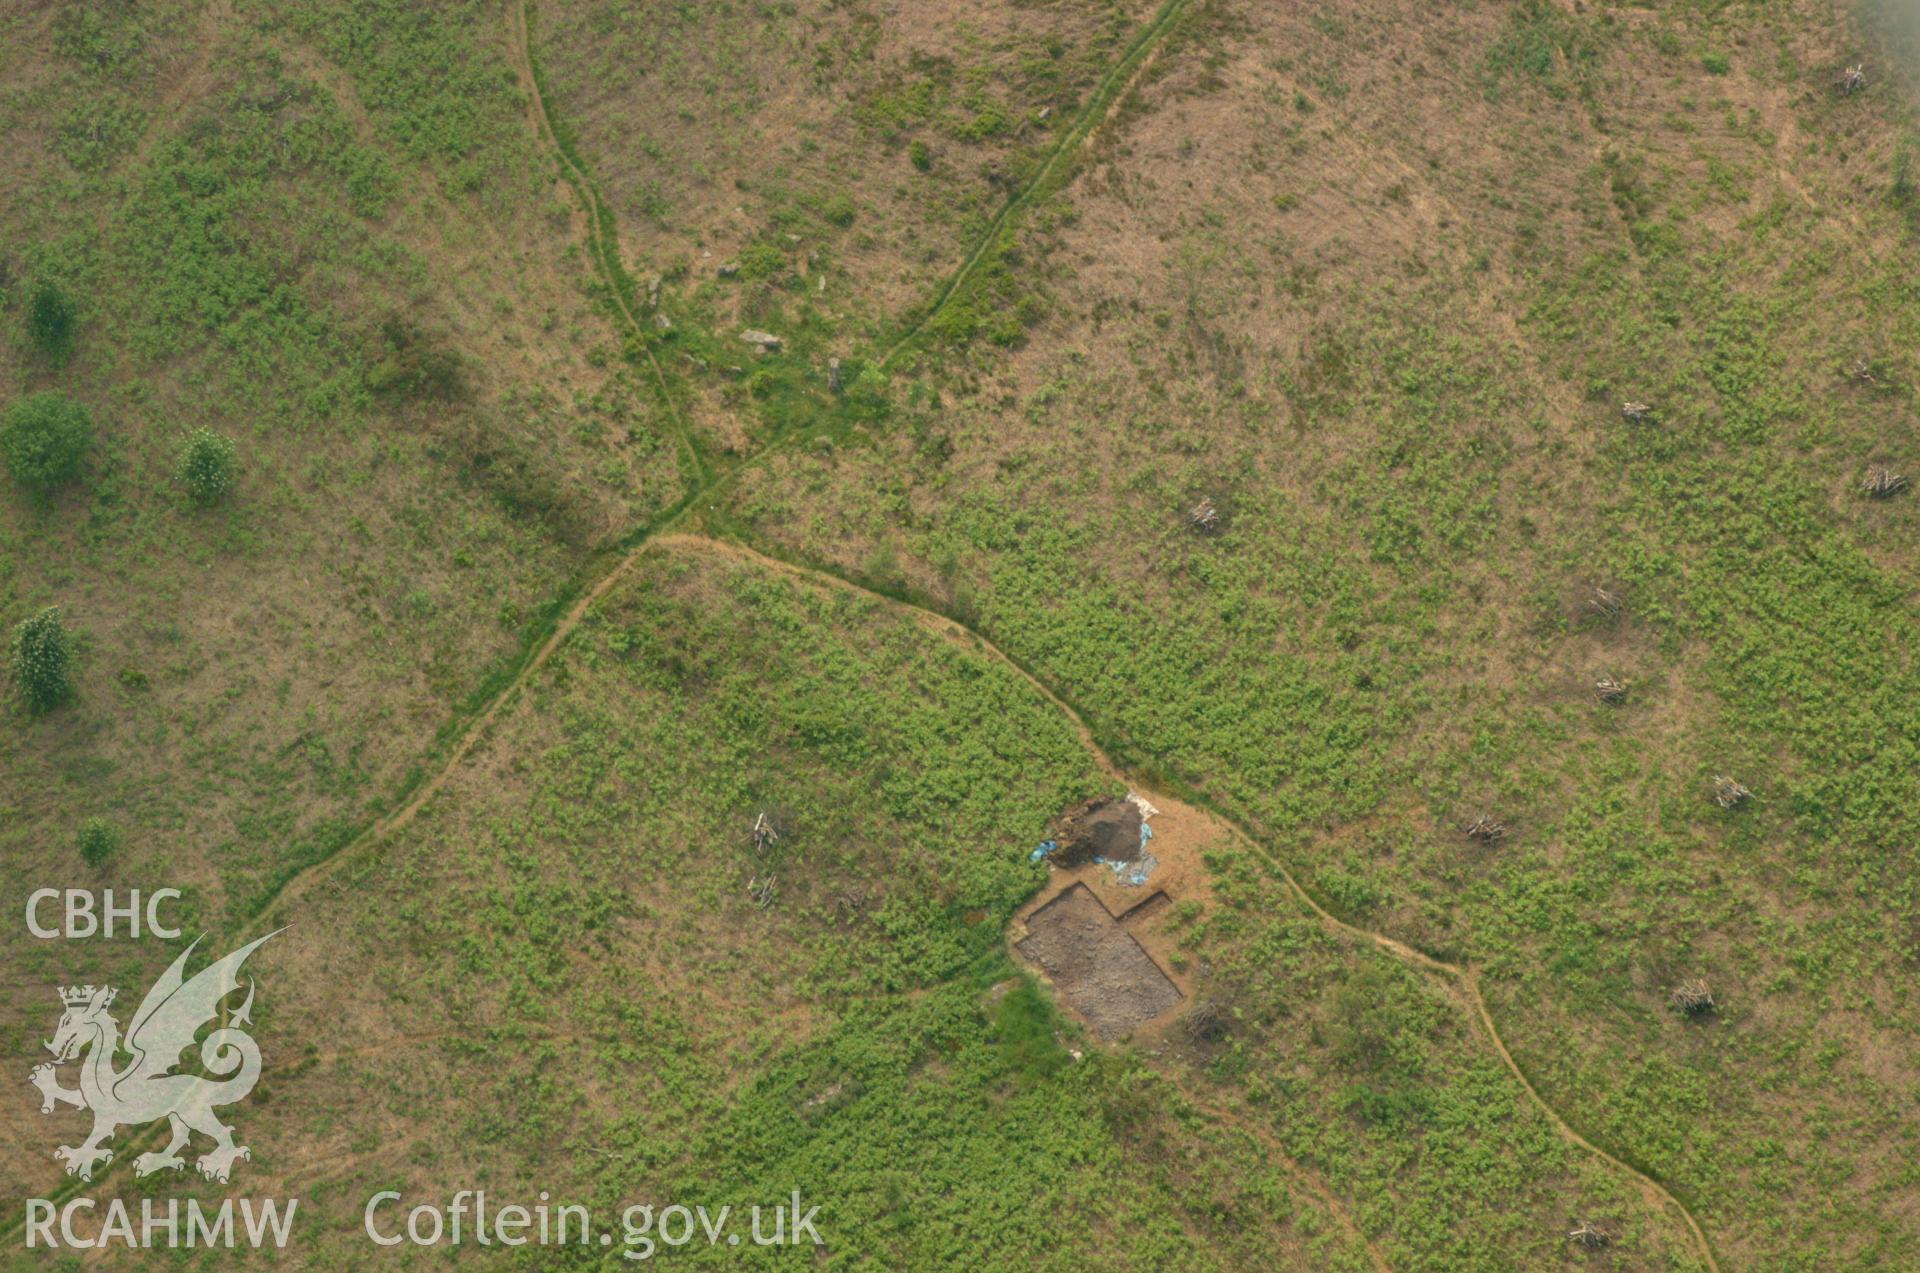 RCAHMW colour oblique aerial photograph of Grey Hill Stone Circle showing excavations by the University of Wales, Newport. Taken on 26 May 2004 by Toby Driver